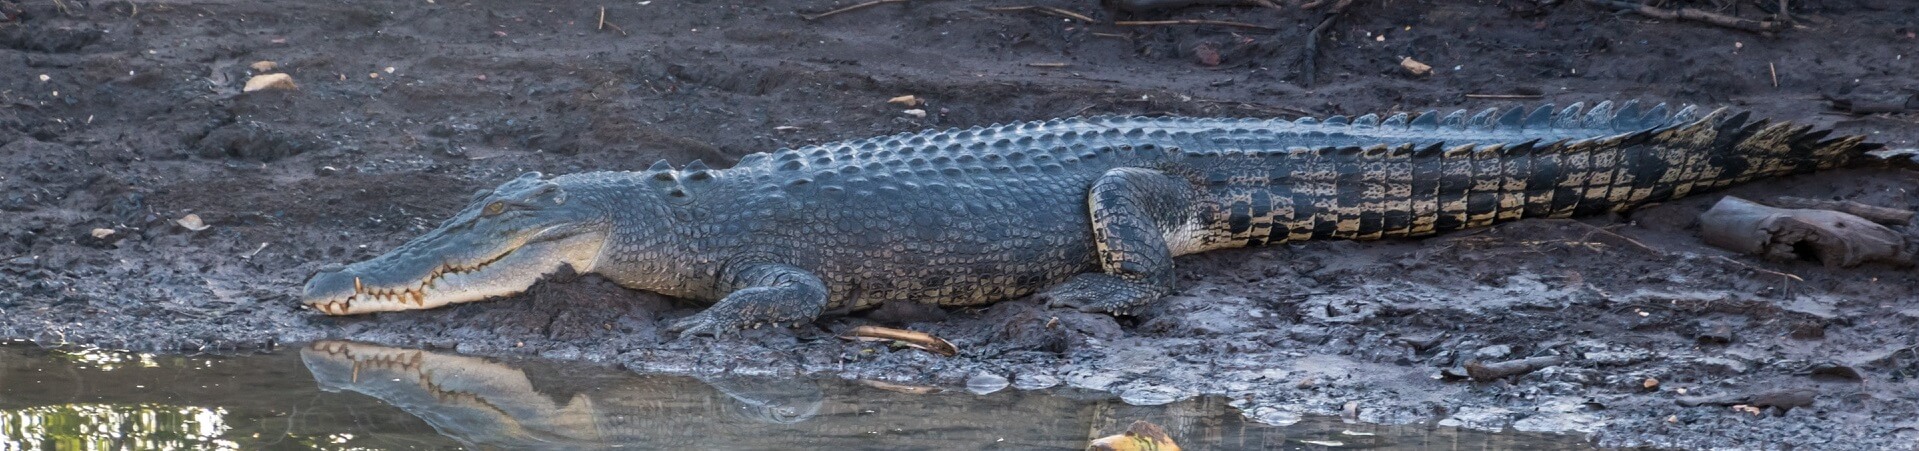 Are there a lot of crocodiles in Darwin?